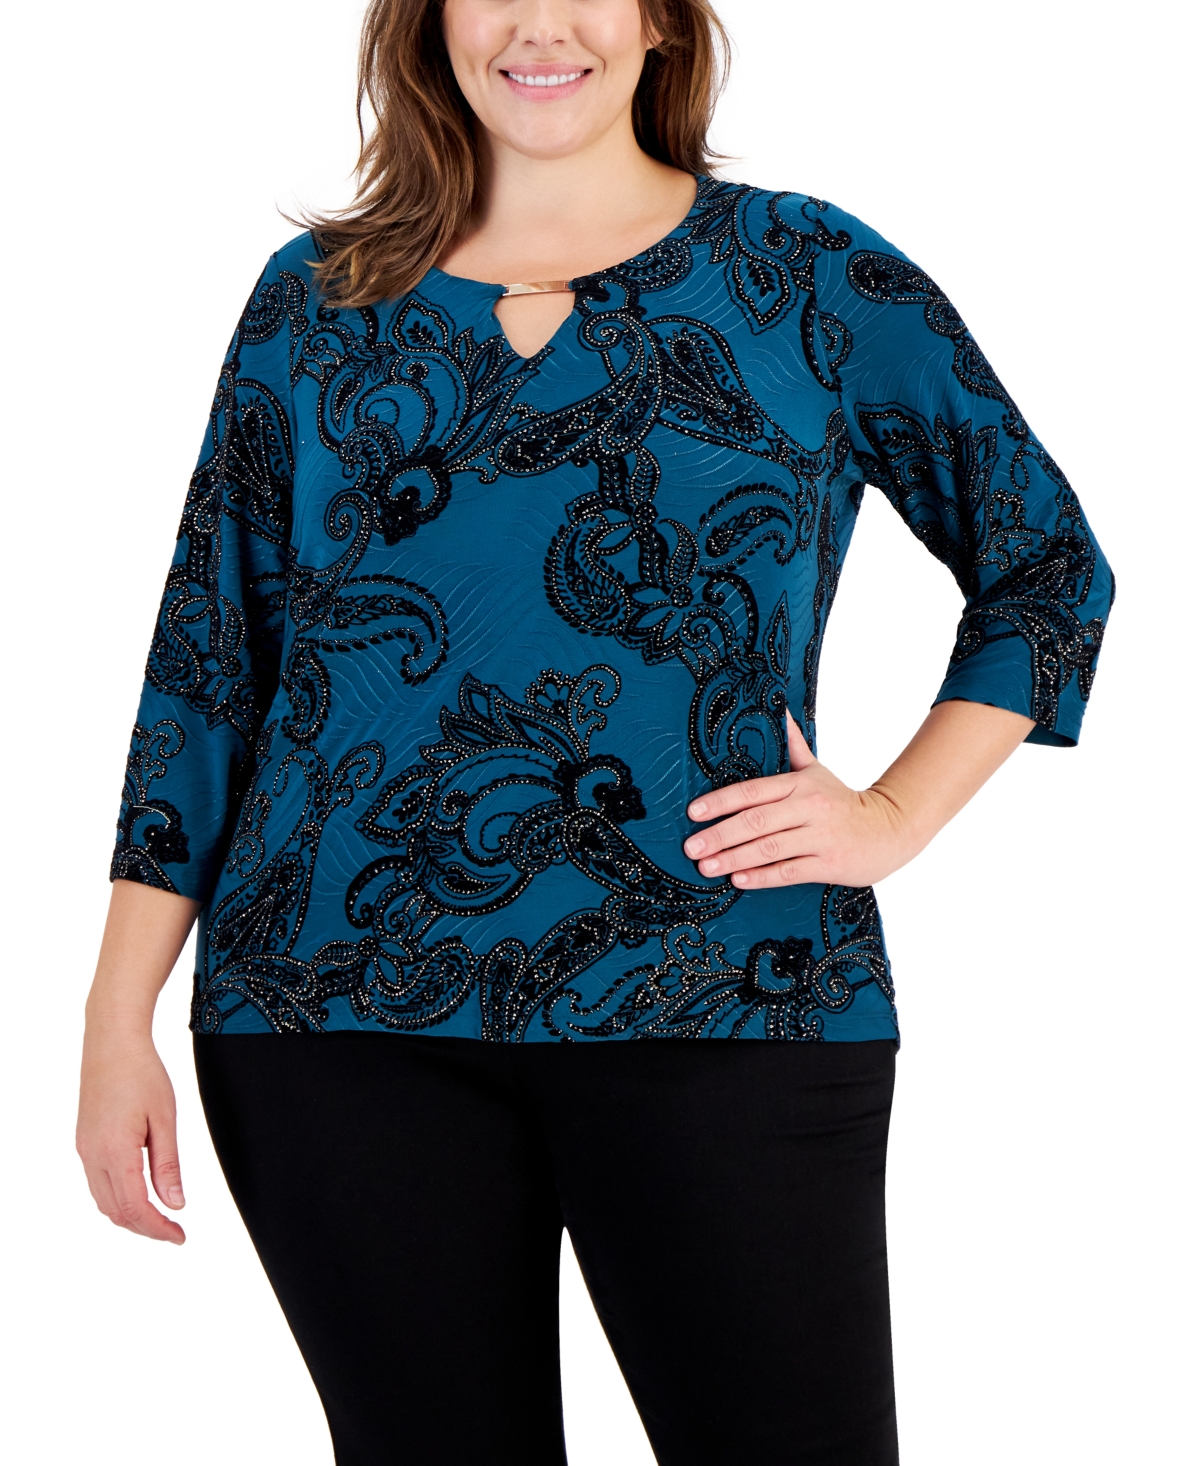 Jm Collection Plus Size Paisley Glitter Keyhole Top, Created for Macy's